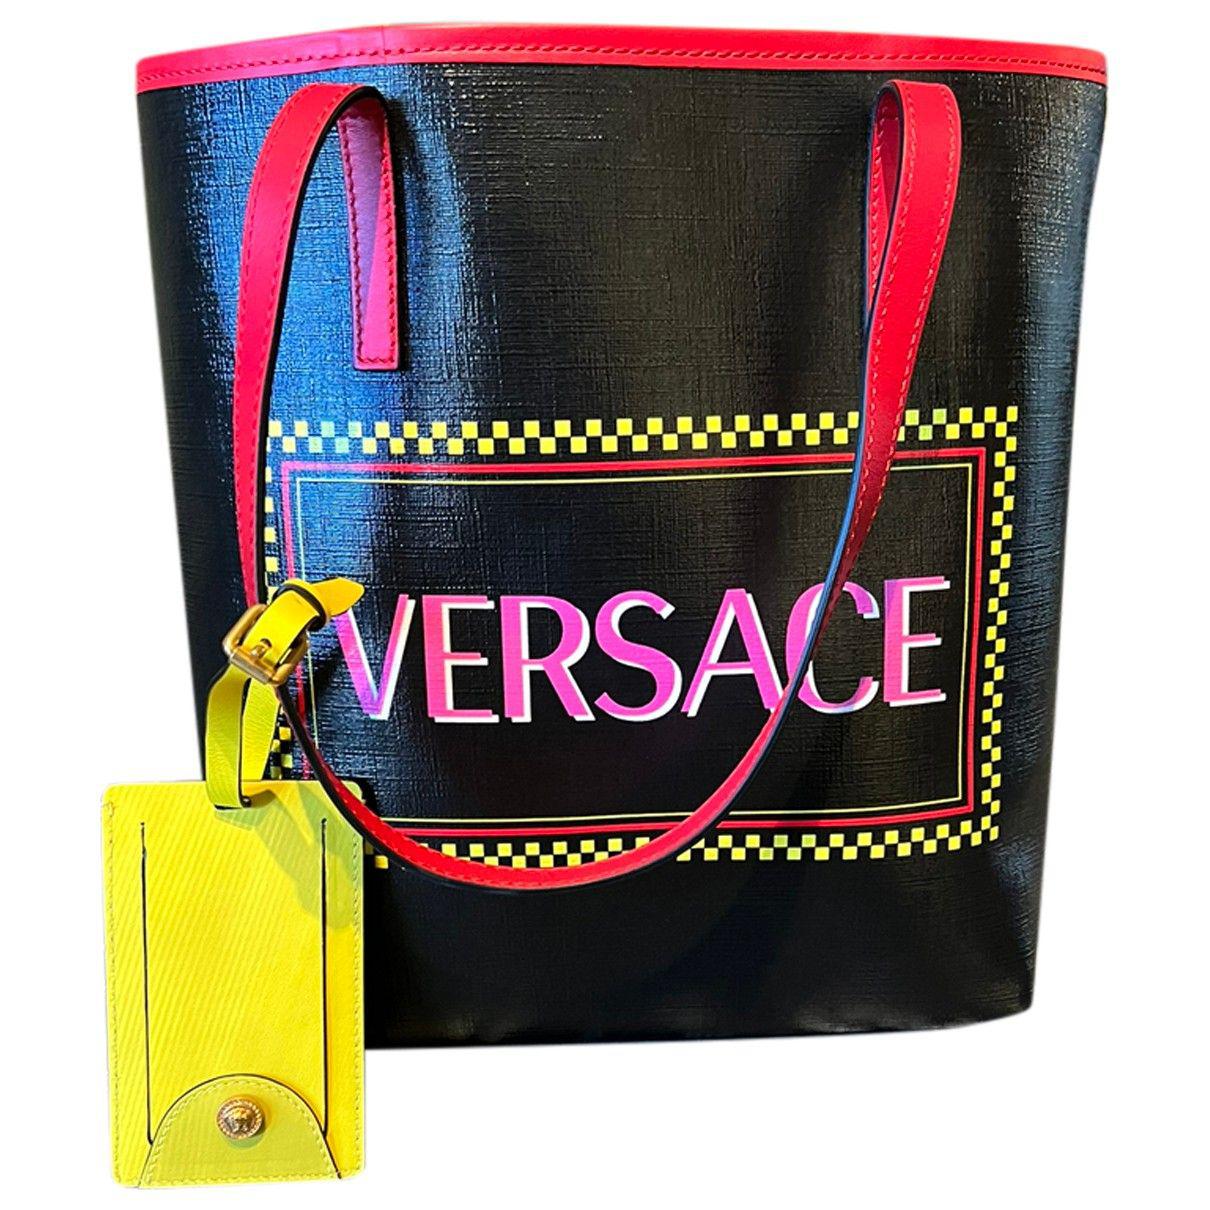 Leather tote by VERSACE